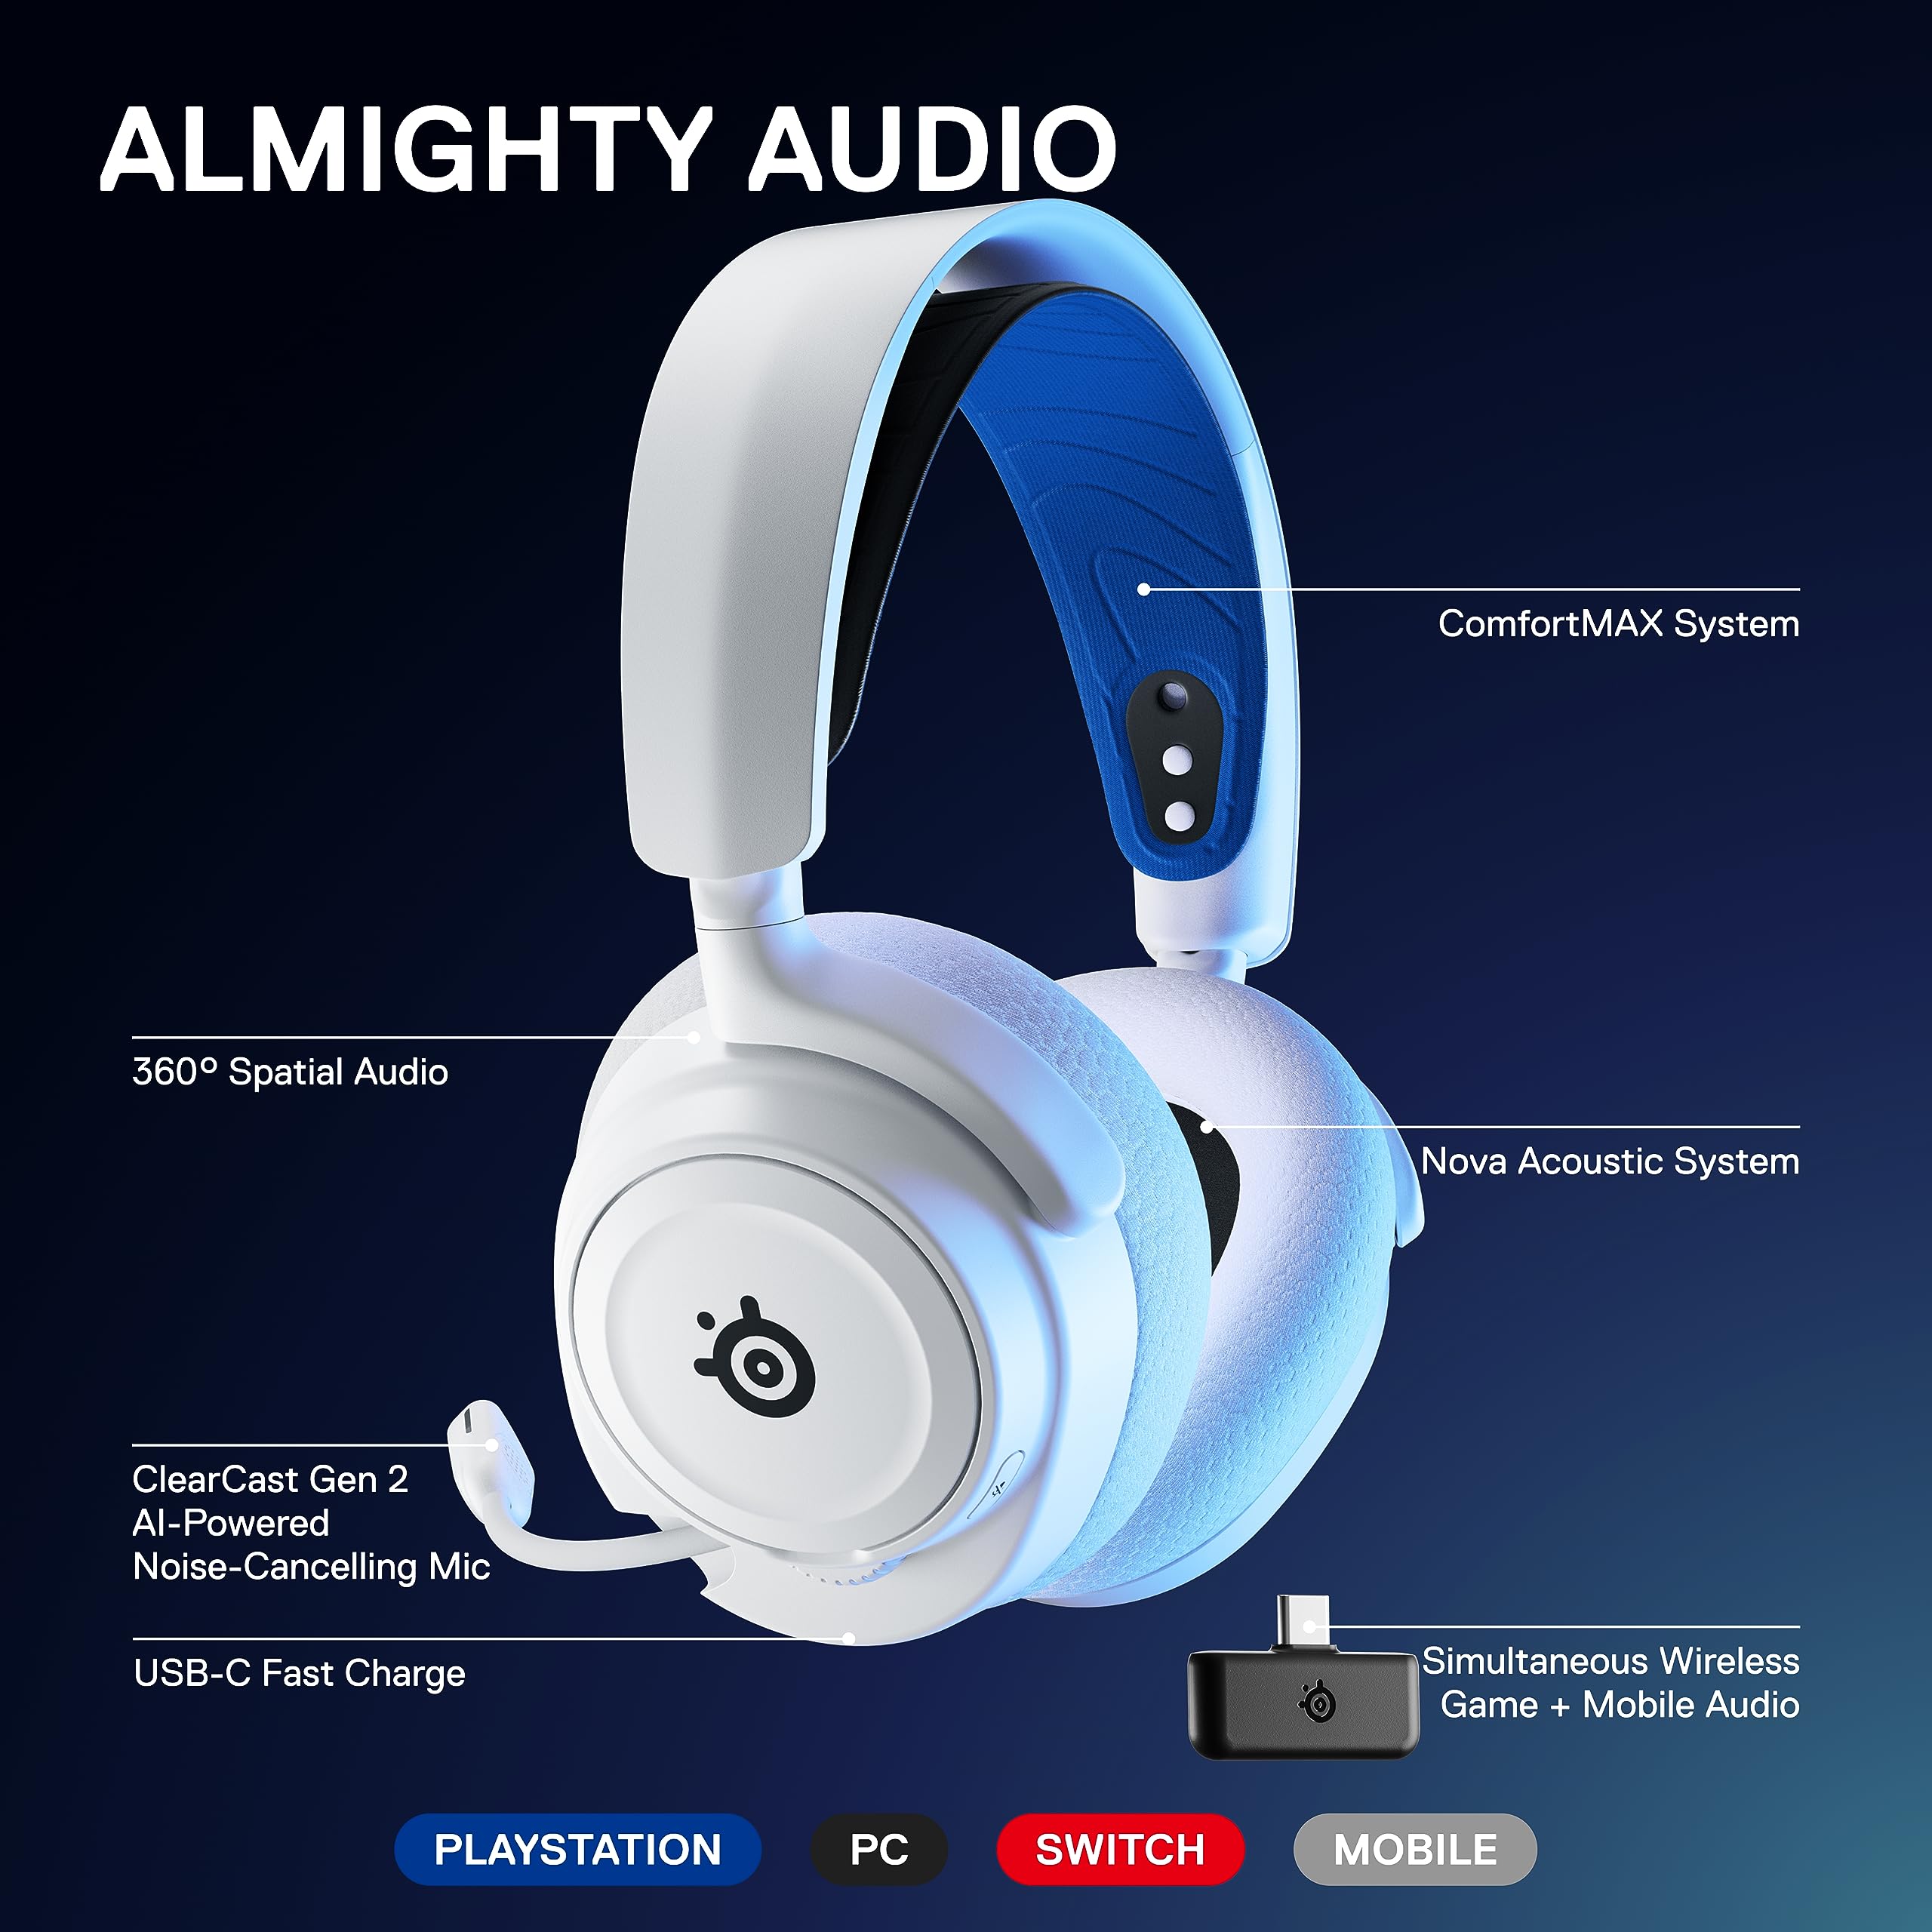 Arctis Nova 7P Wireless Multi-System Gaming & Mobile Headset - Nova Acoustic System - 2.4GHz & Simultaneous Bluetooth - 38Hr Battery - USB-C - ClearCast Gen2 Mic - PlayStation, PC, Switch - White